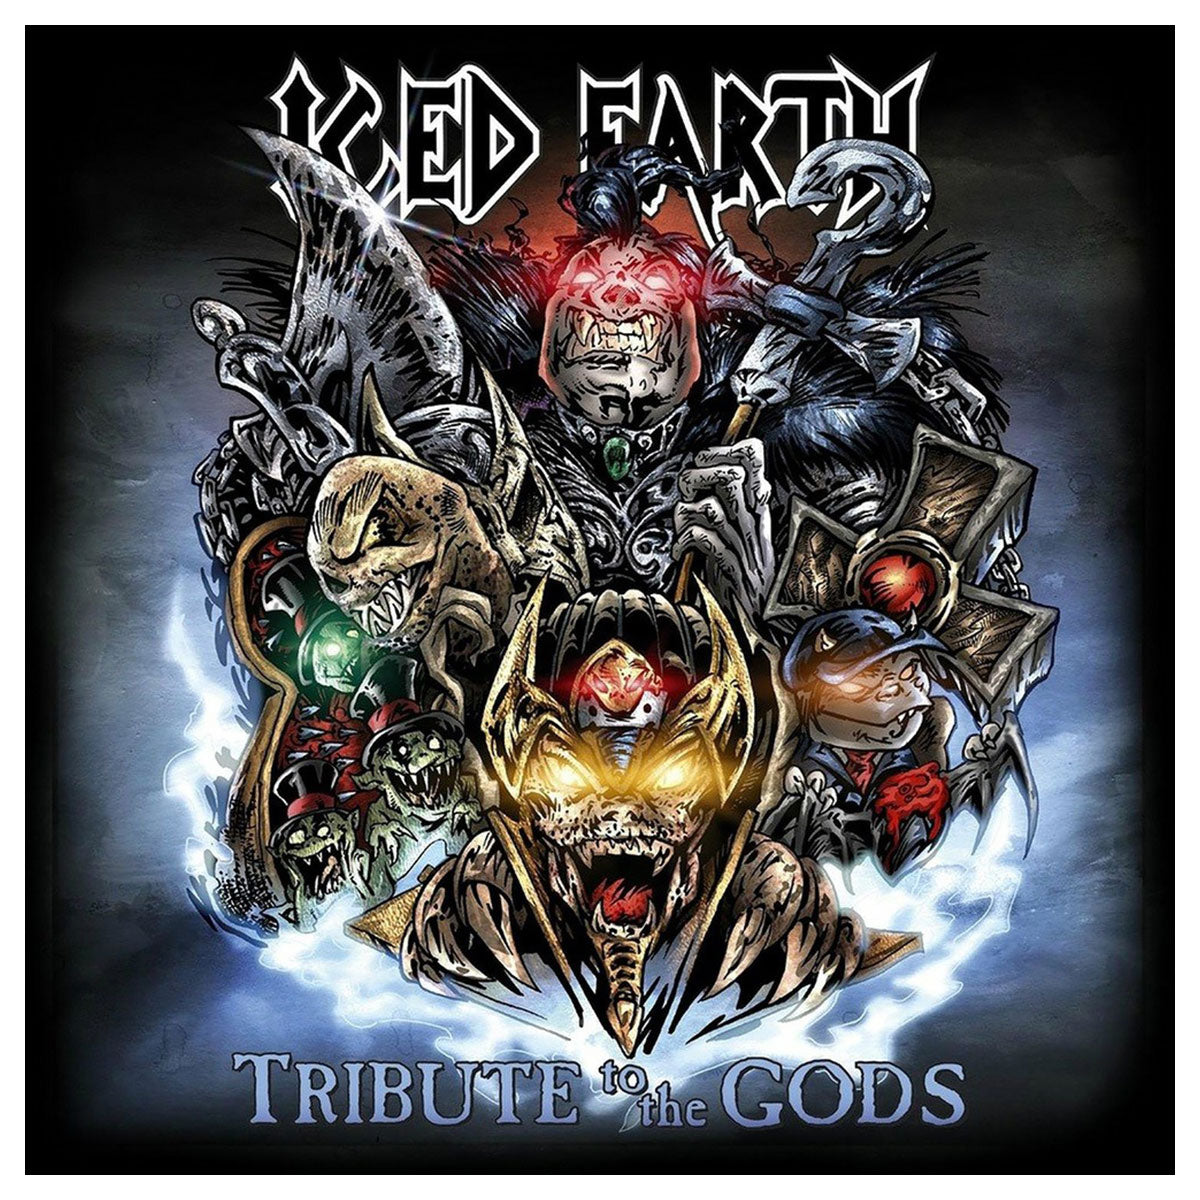 ICED EARTH Tribute to the Gods CD